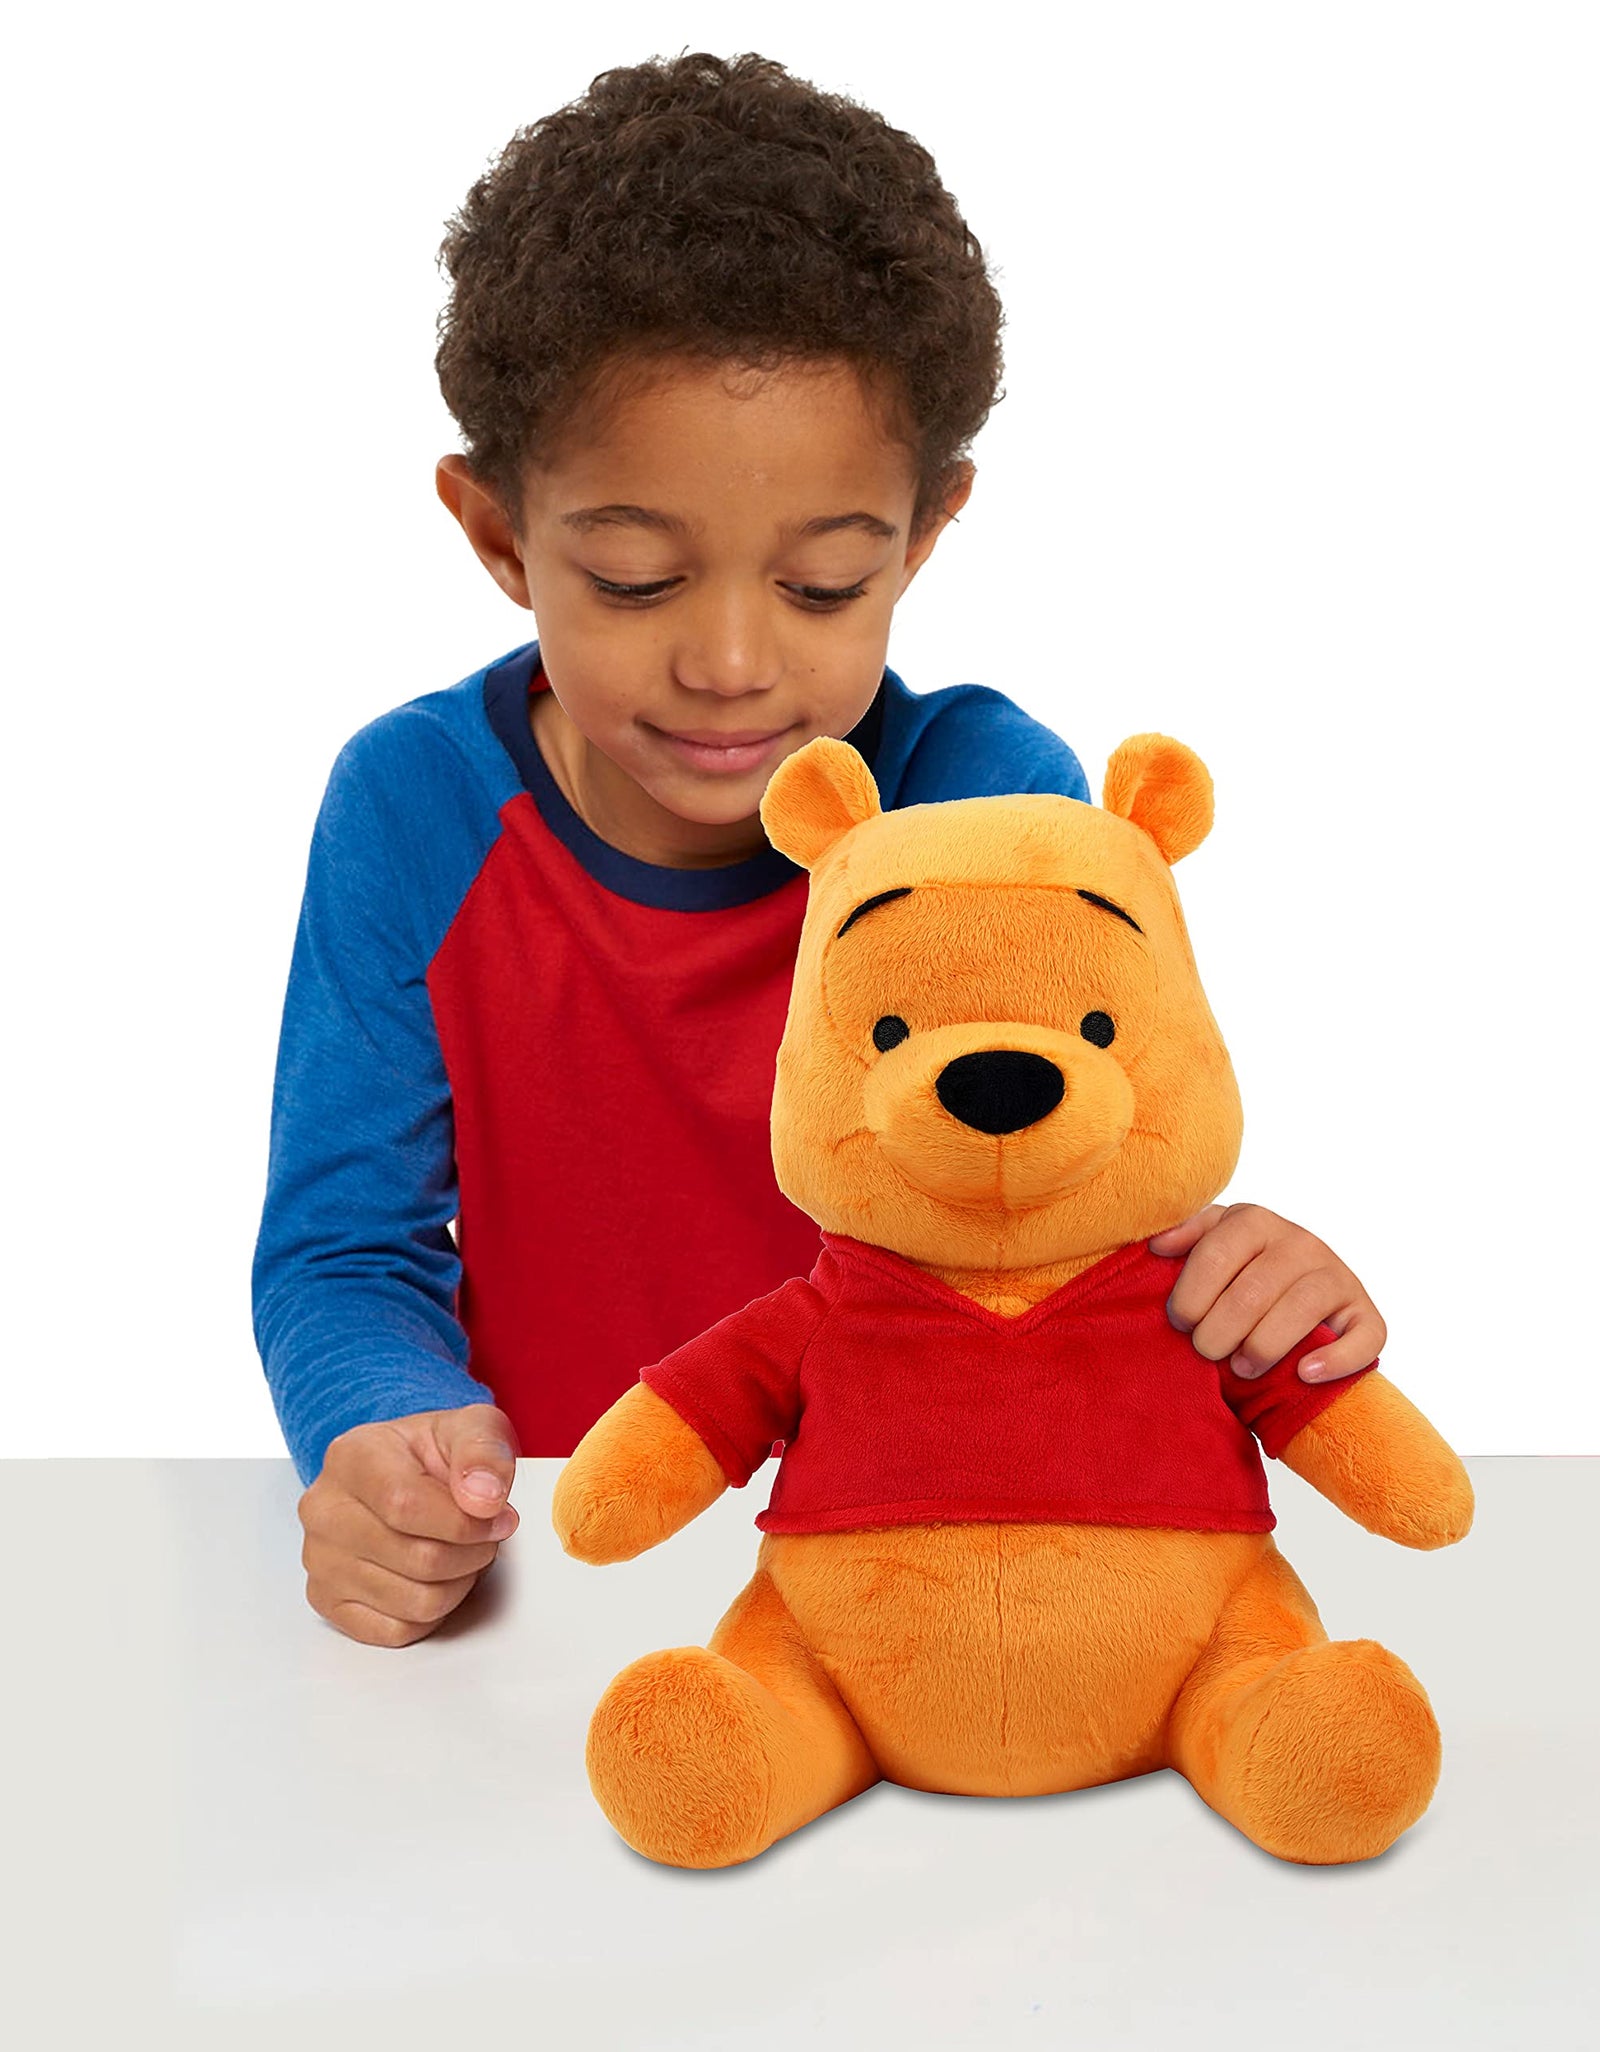 Disney Classics Friends Large 12.2-inch Plush Winnie the Pooh, by Just Play